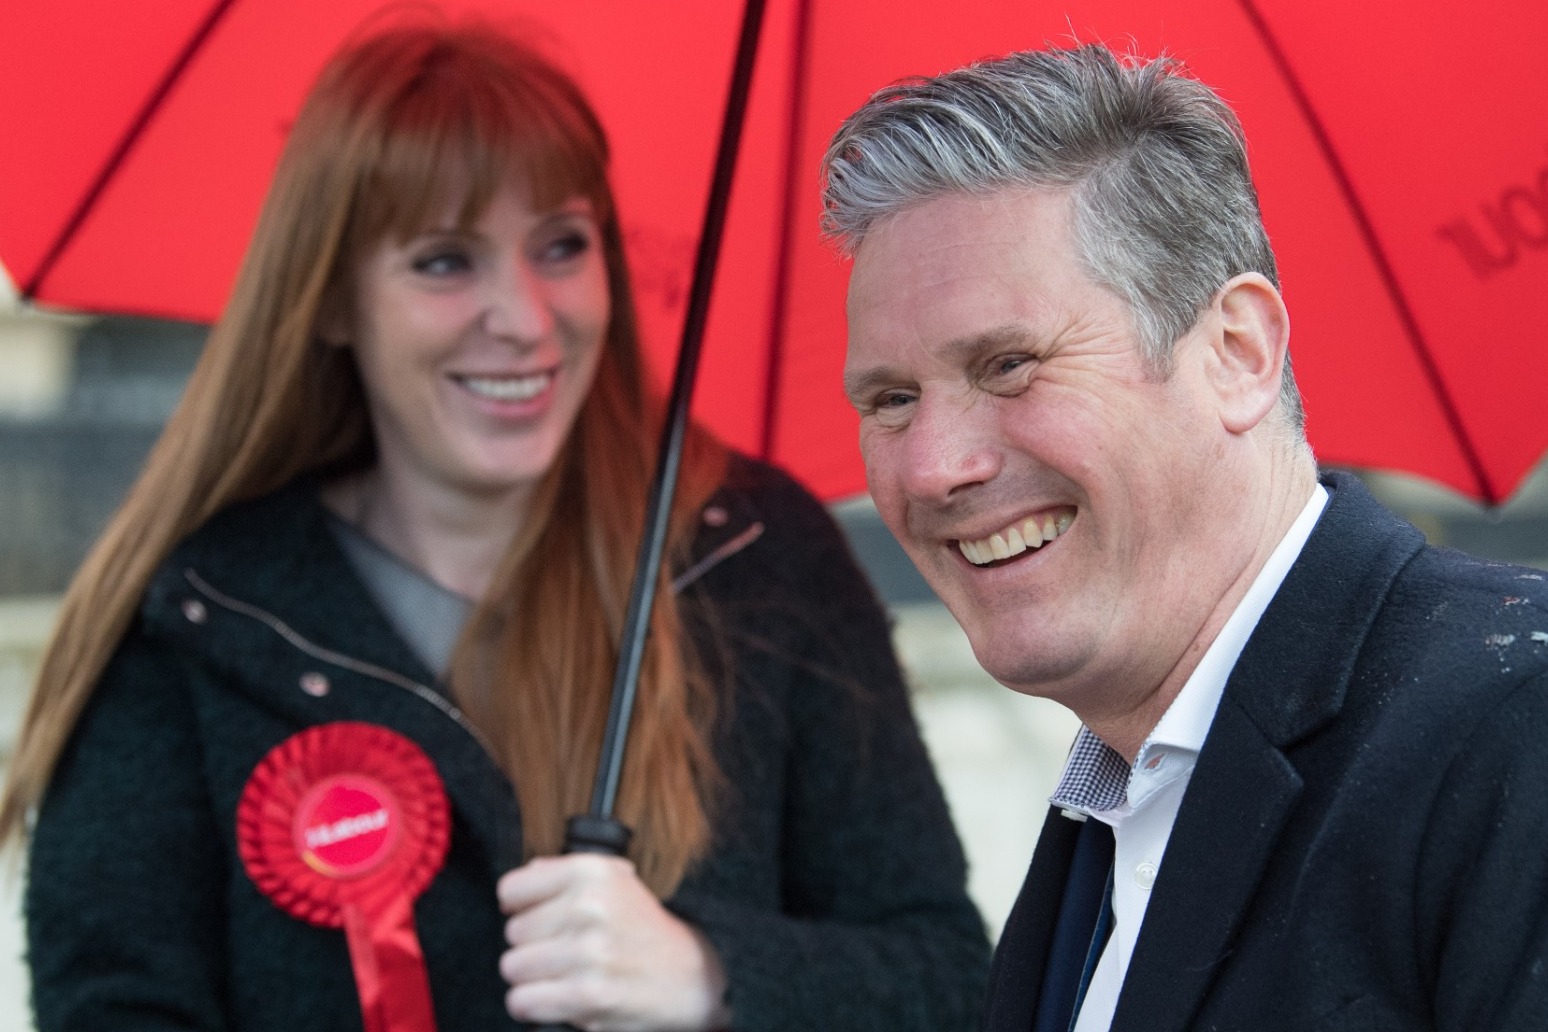 Starmer hires new strategist as fallout over Labour election results continues 